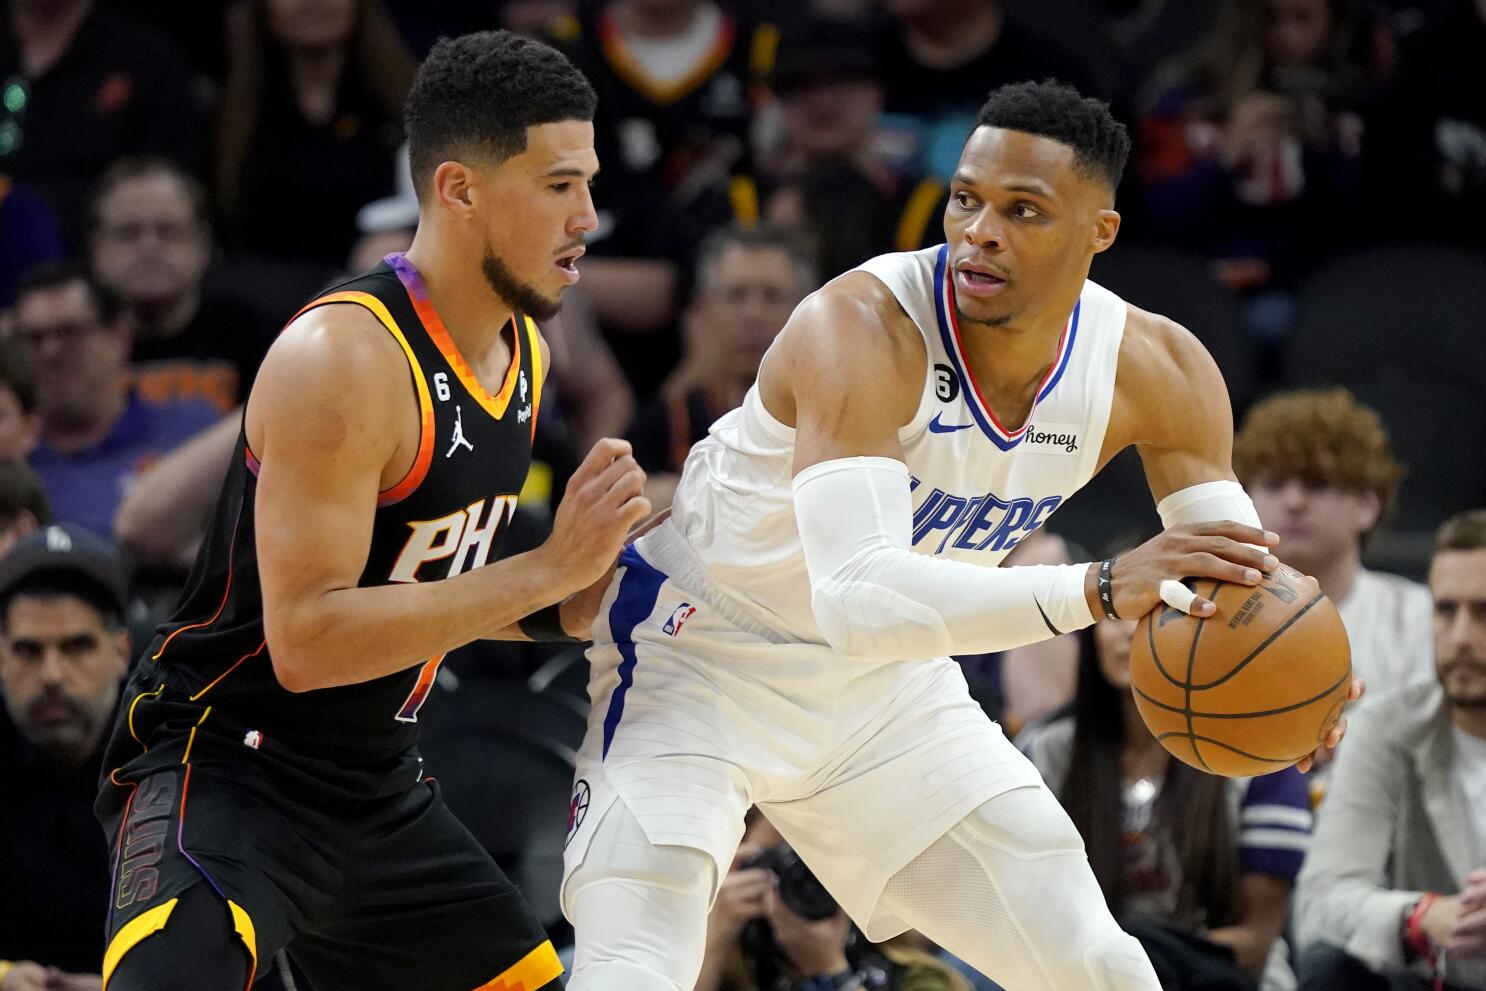 Westbrook explains move to LA Clippers: The ultimate goal is to